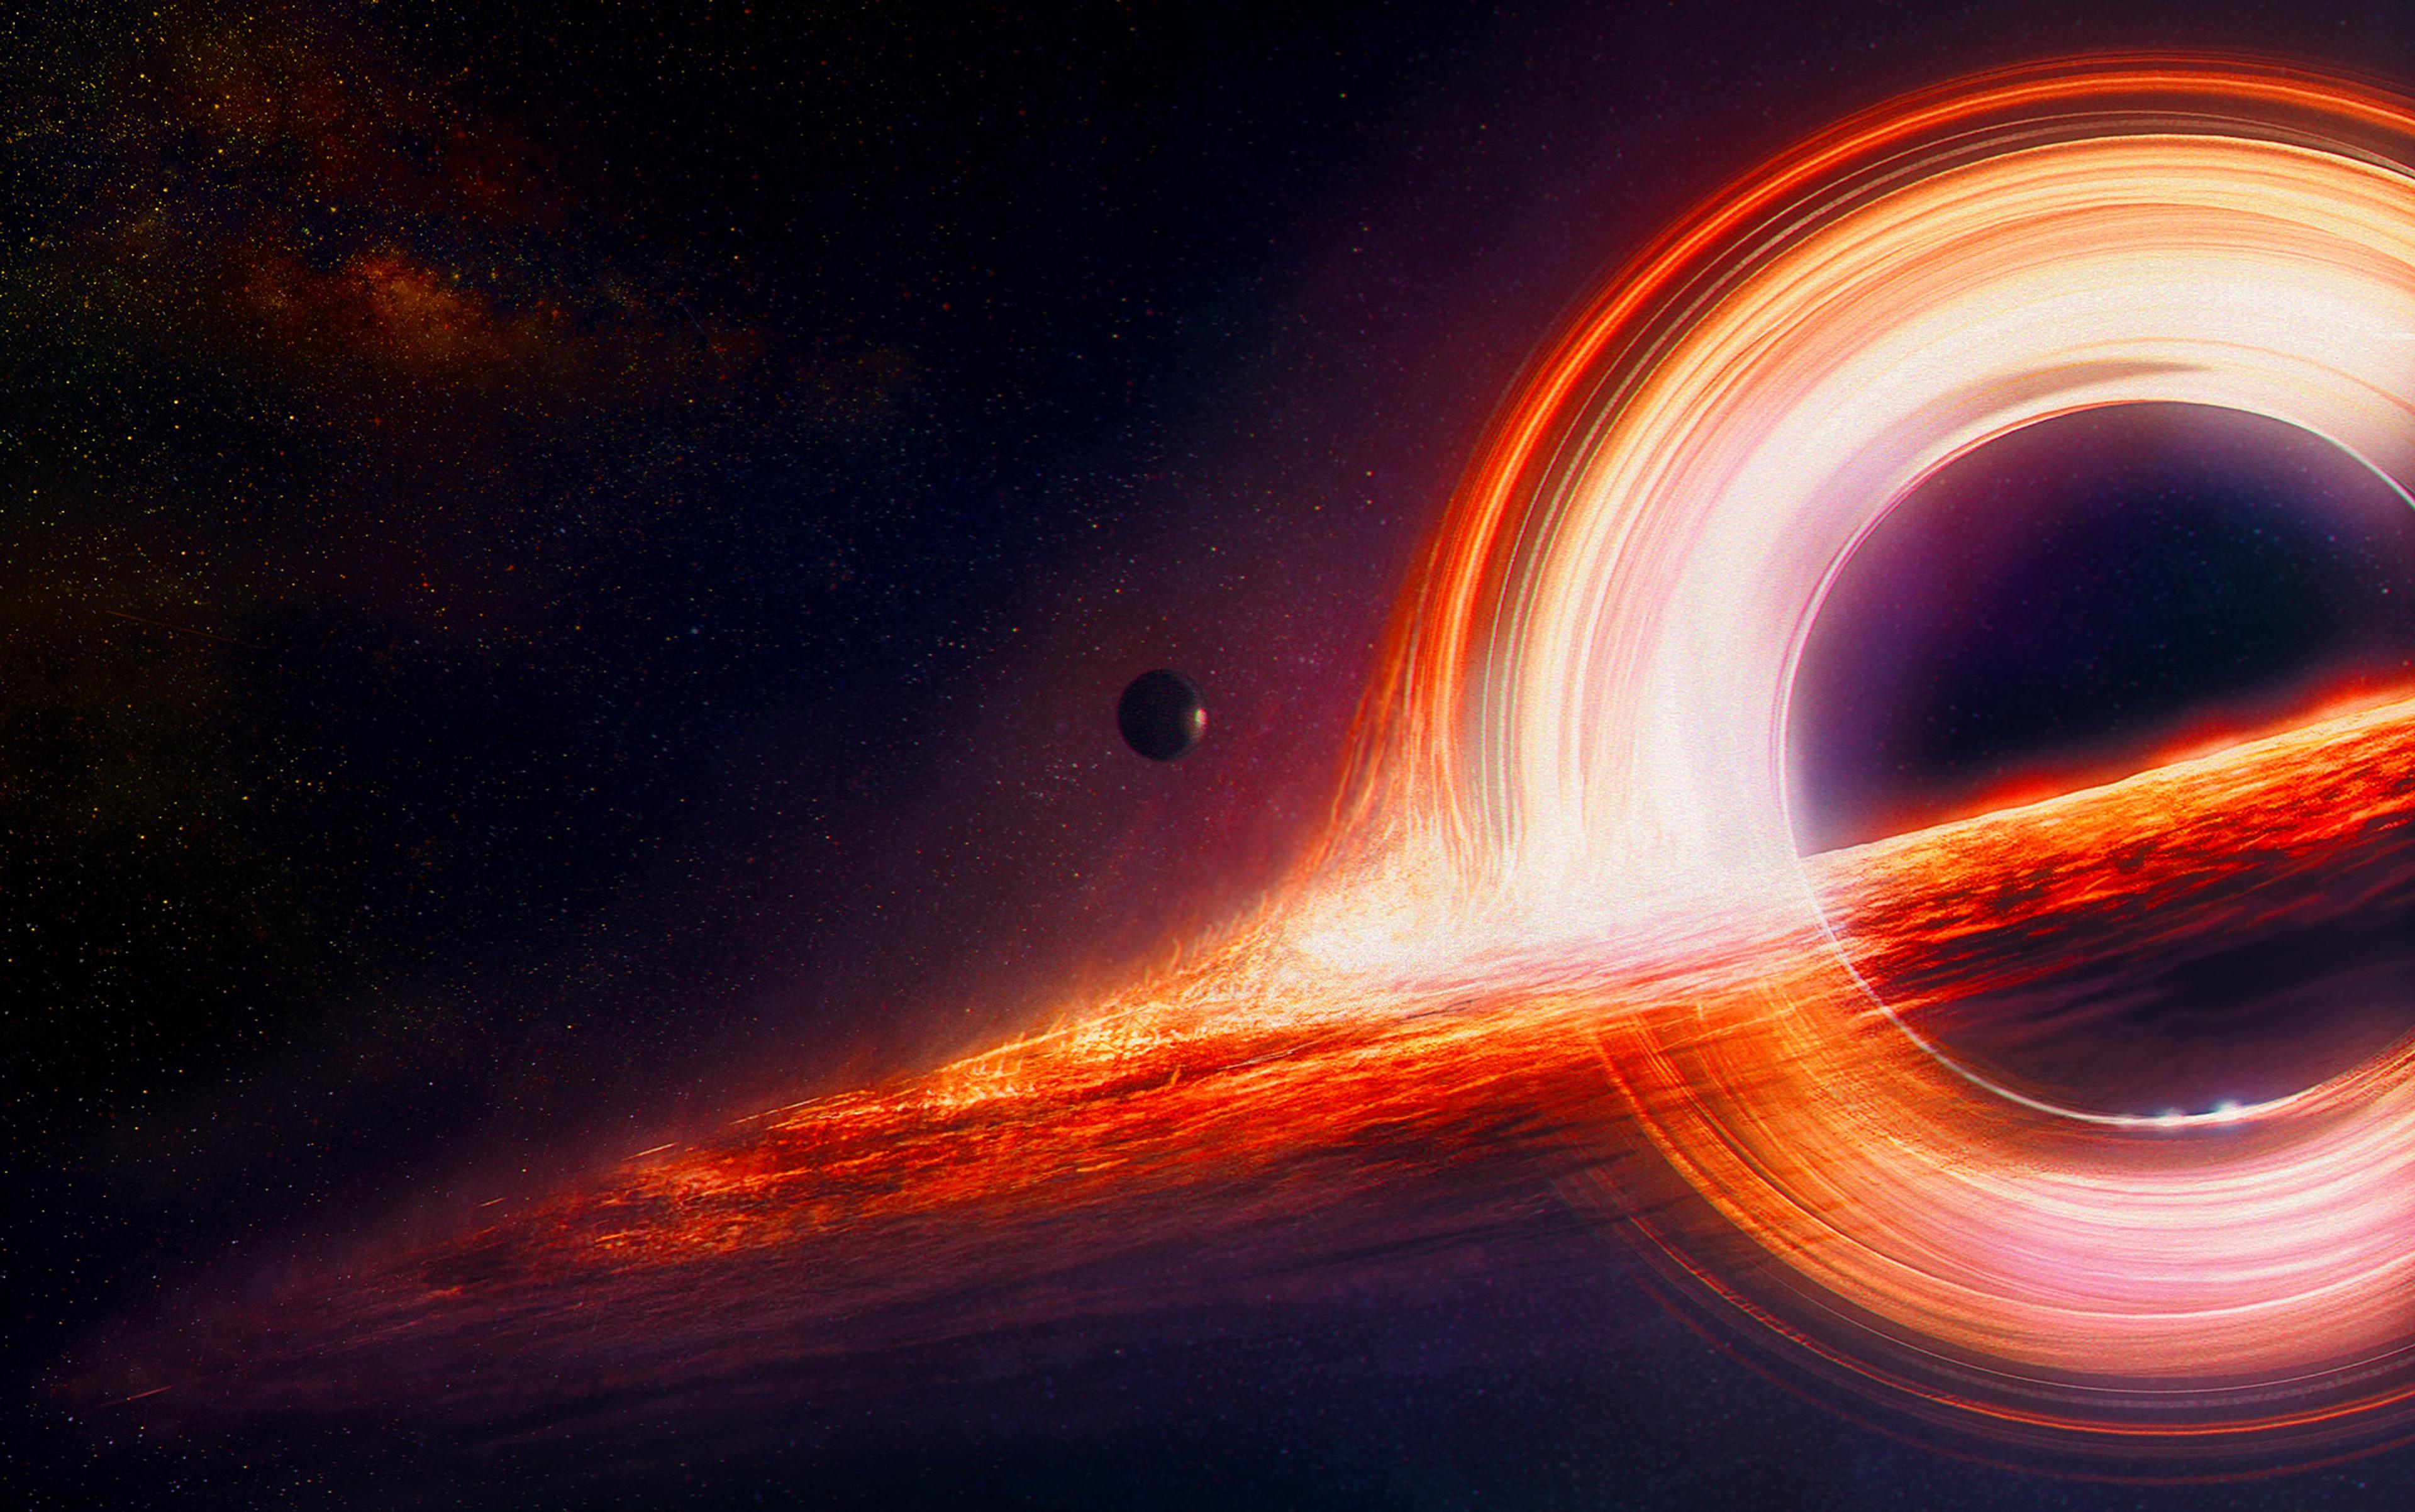 How black hole thought experiments help explain the Universe